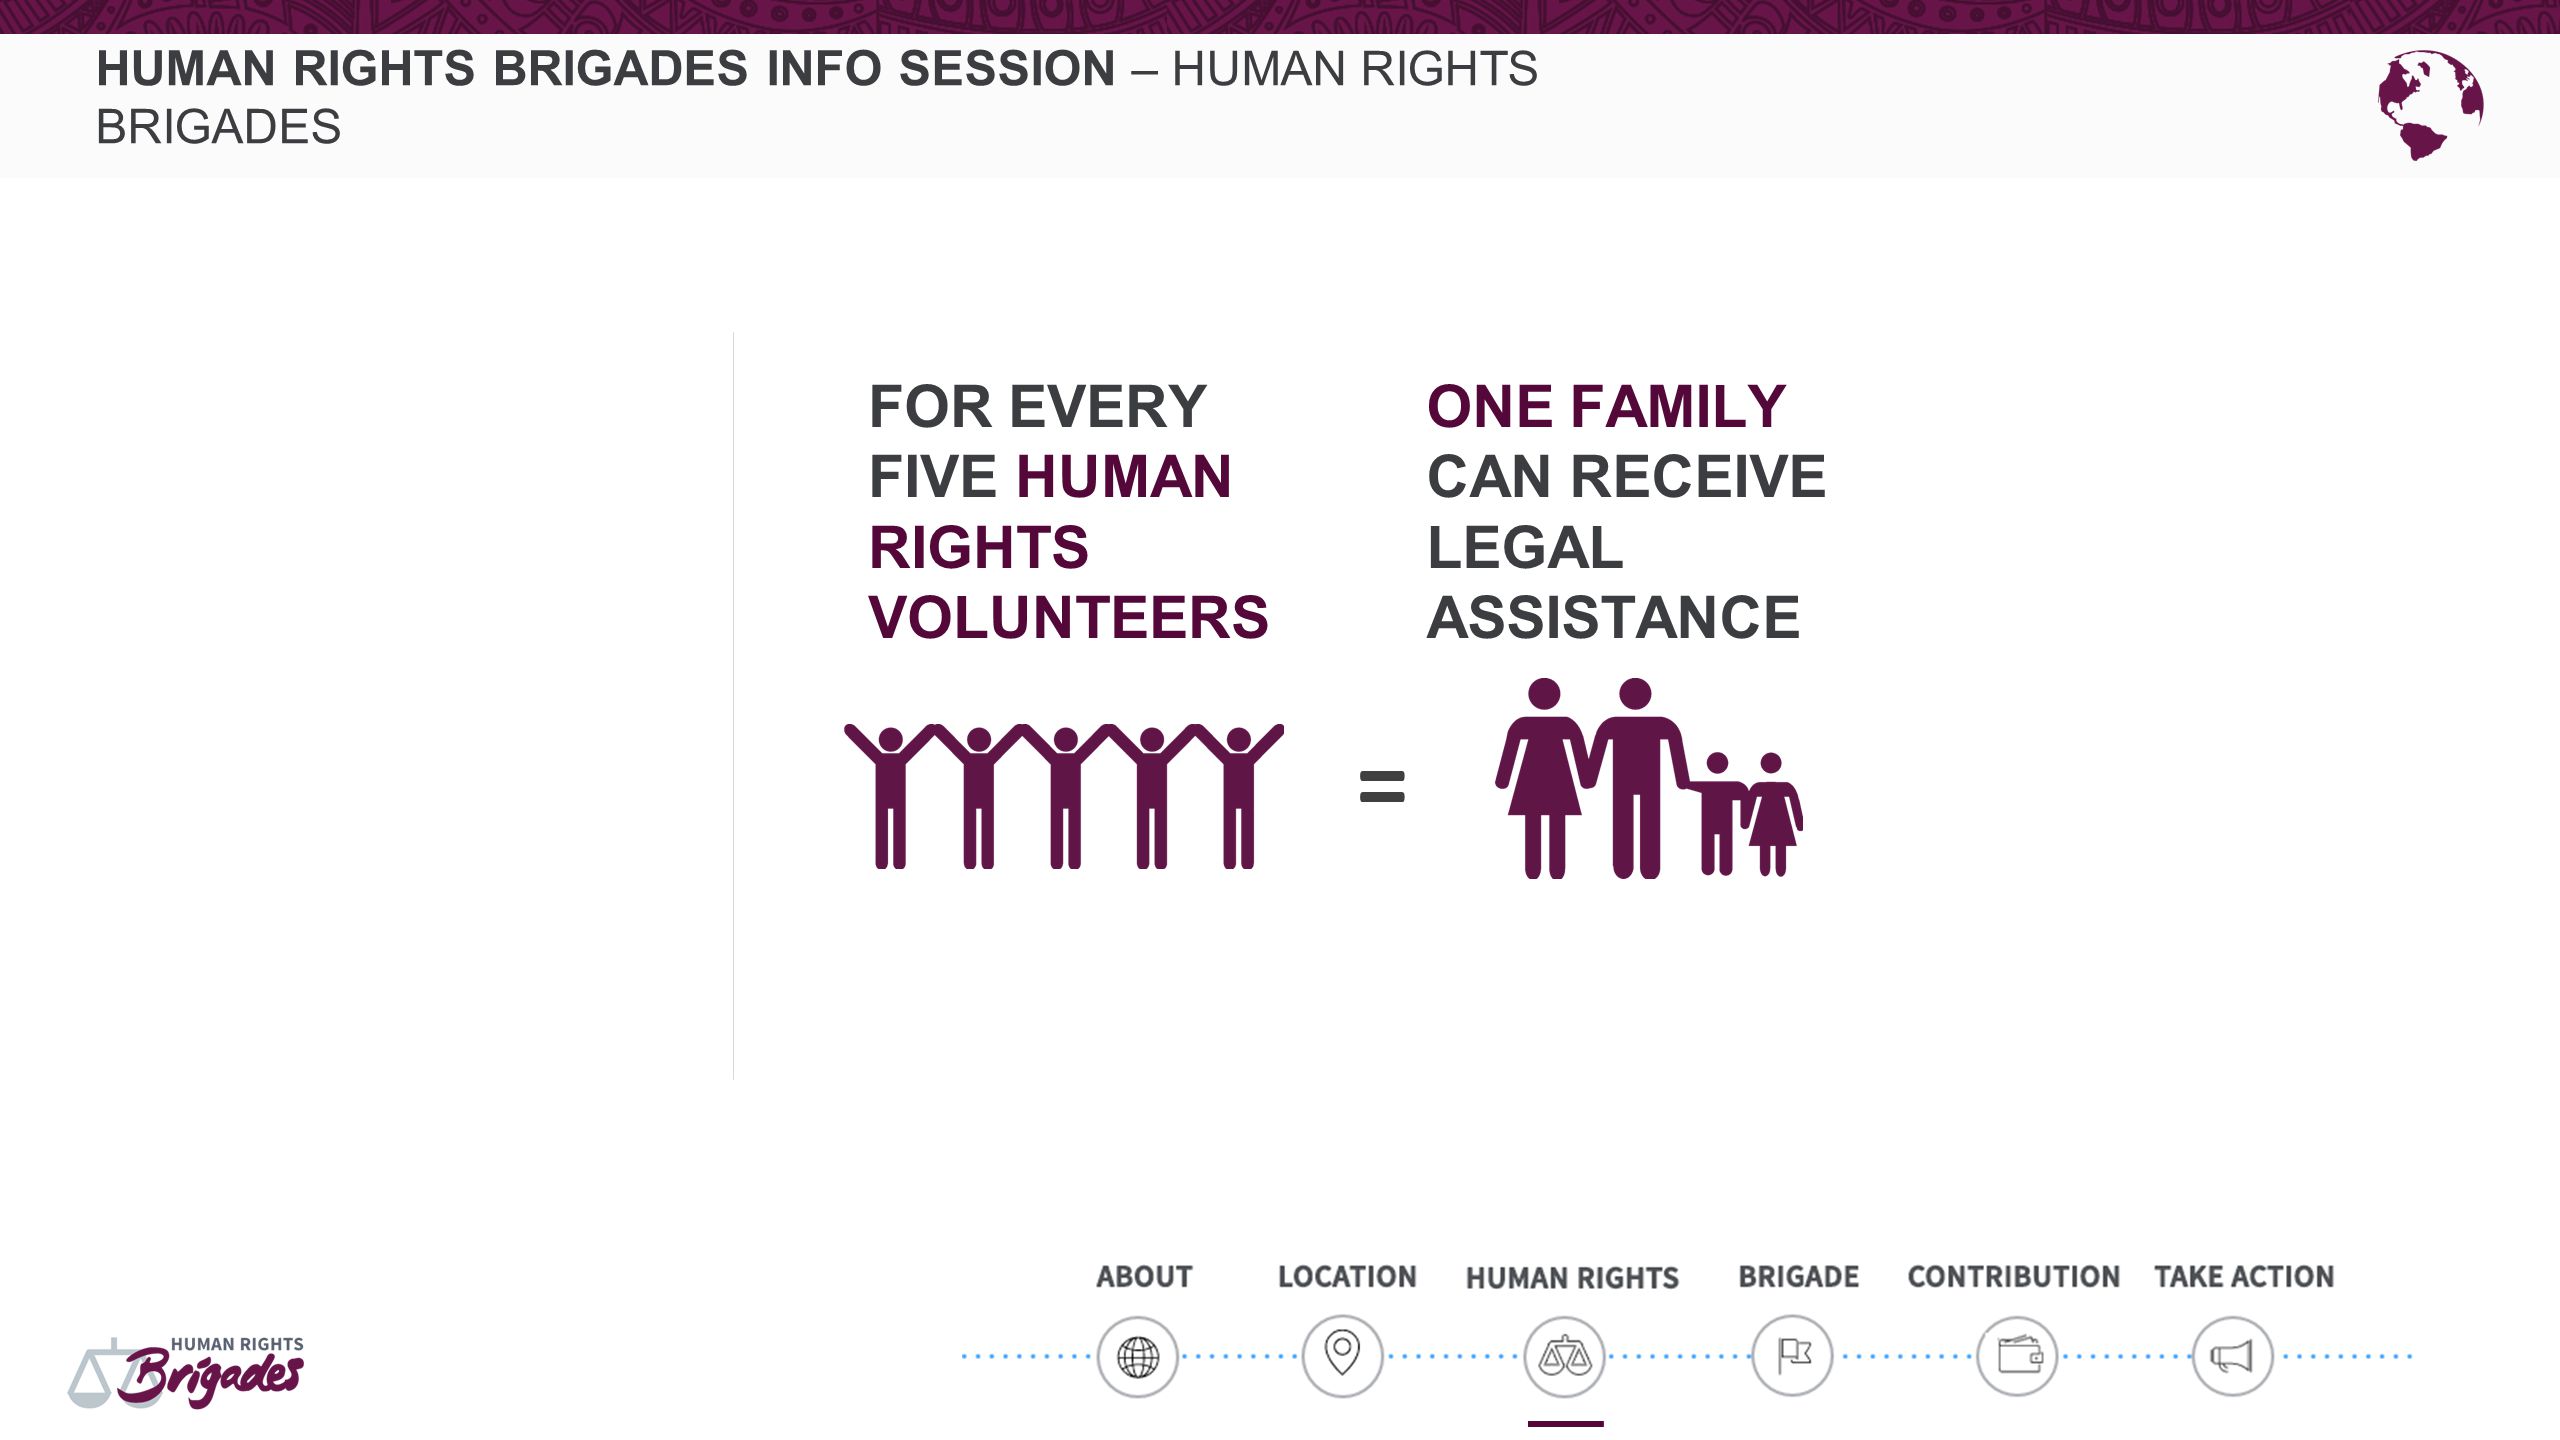 HUMAN RIGHTS BRIGADES INFO SESSION – HUMAN RIGHTS BRIGADES FOR EVERY FIVE HUMAN RIGHTS VOLUNTEERS = ONE FAMILY CAN RECEIVE LEGAL ASSISTANCE